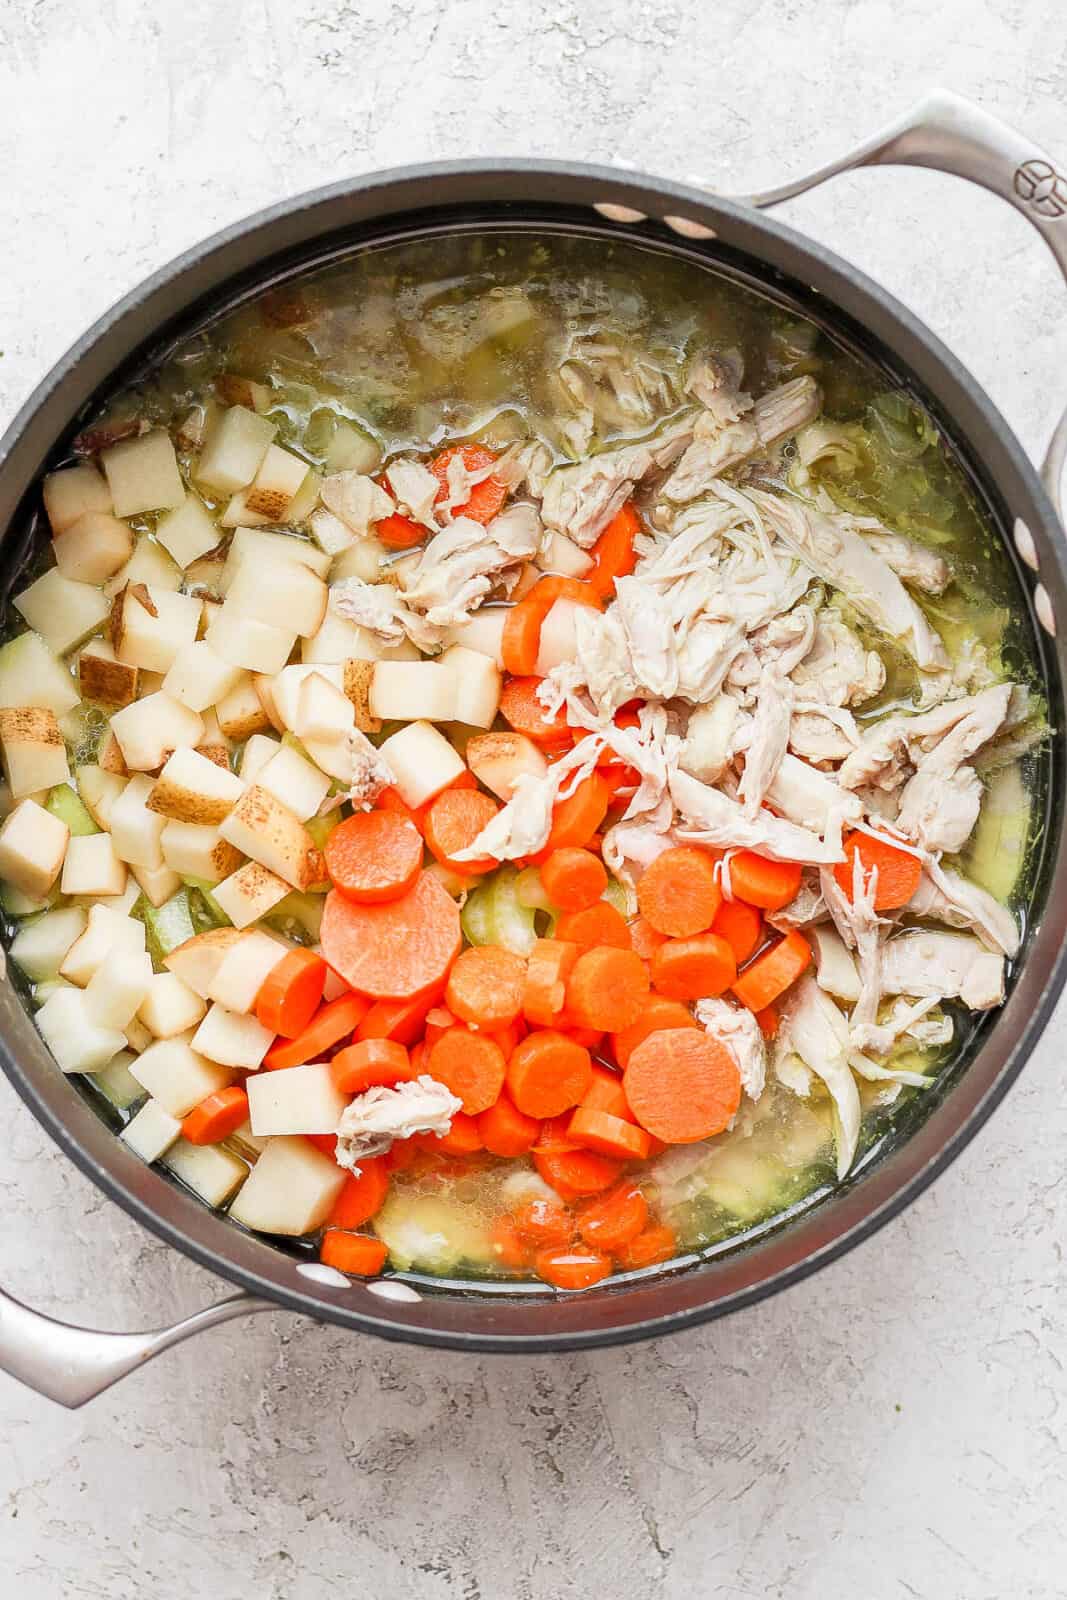 Shredded chicken added back to the pot along with the celery, carrots, and potato.